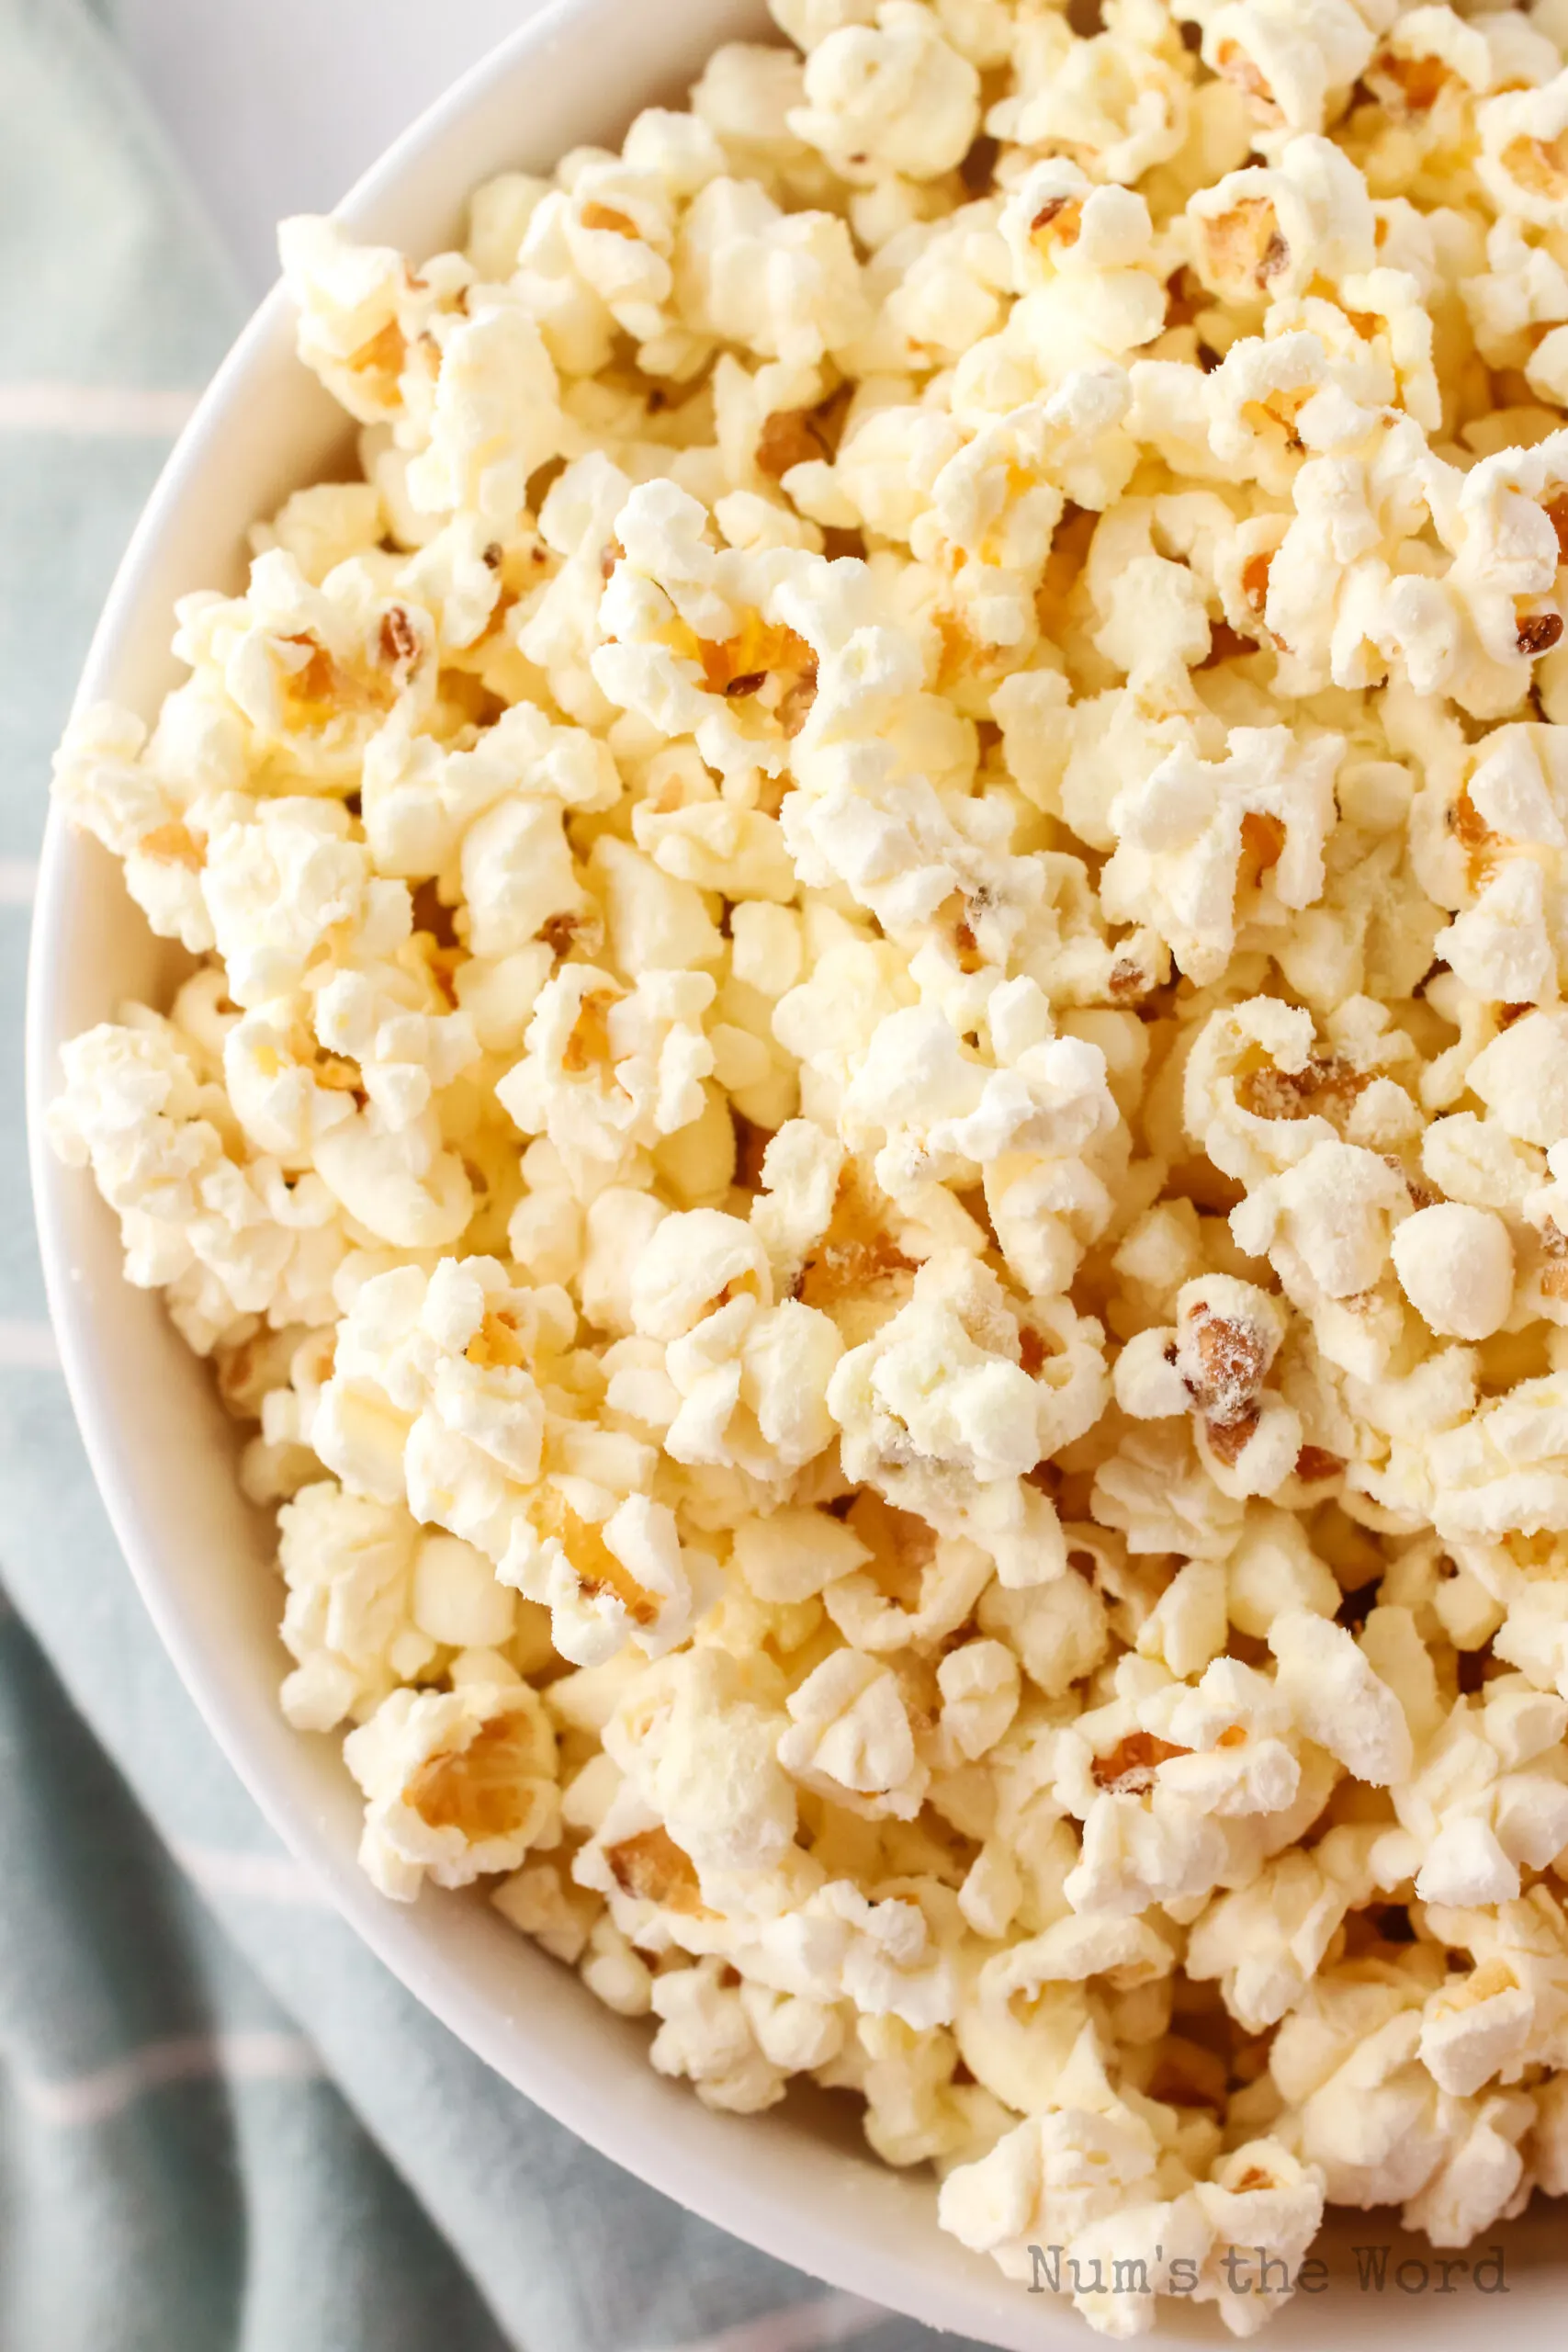 big bowl of white cheddar popcorn. Photo taken from the top looking down.